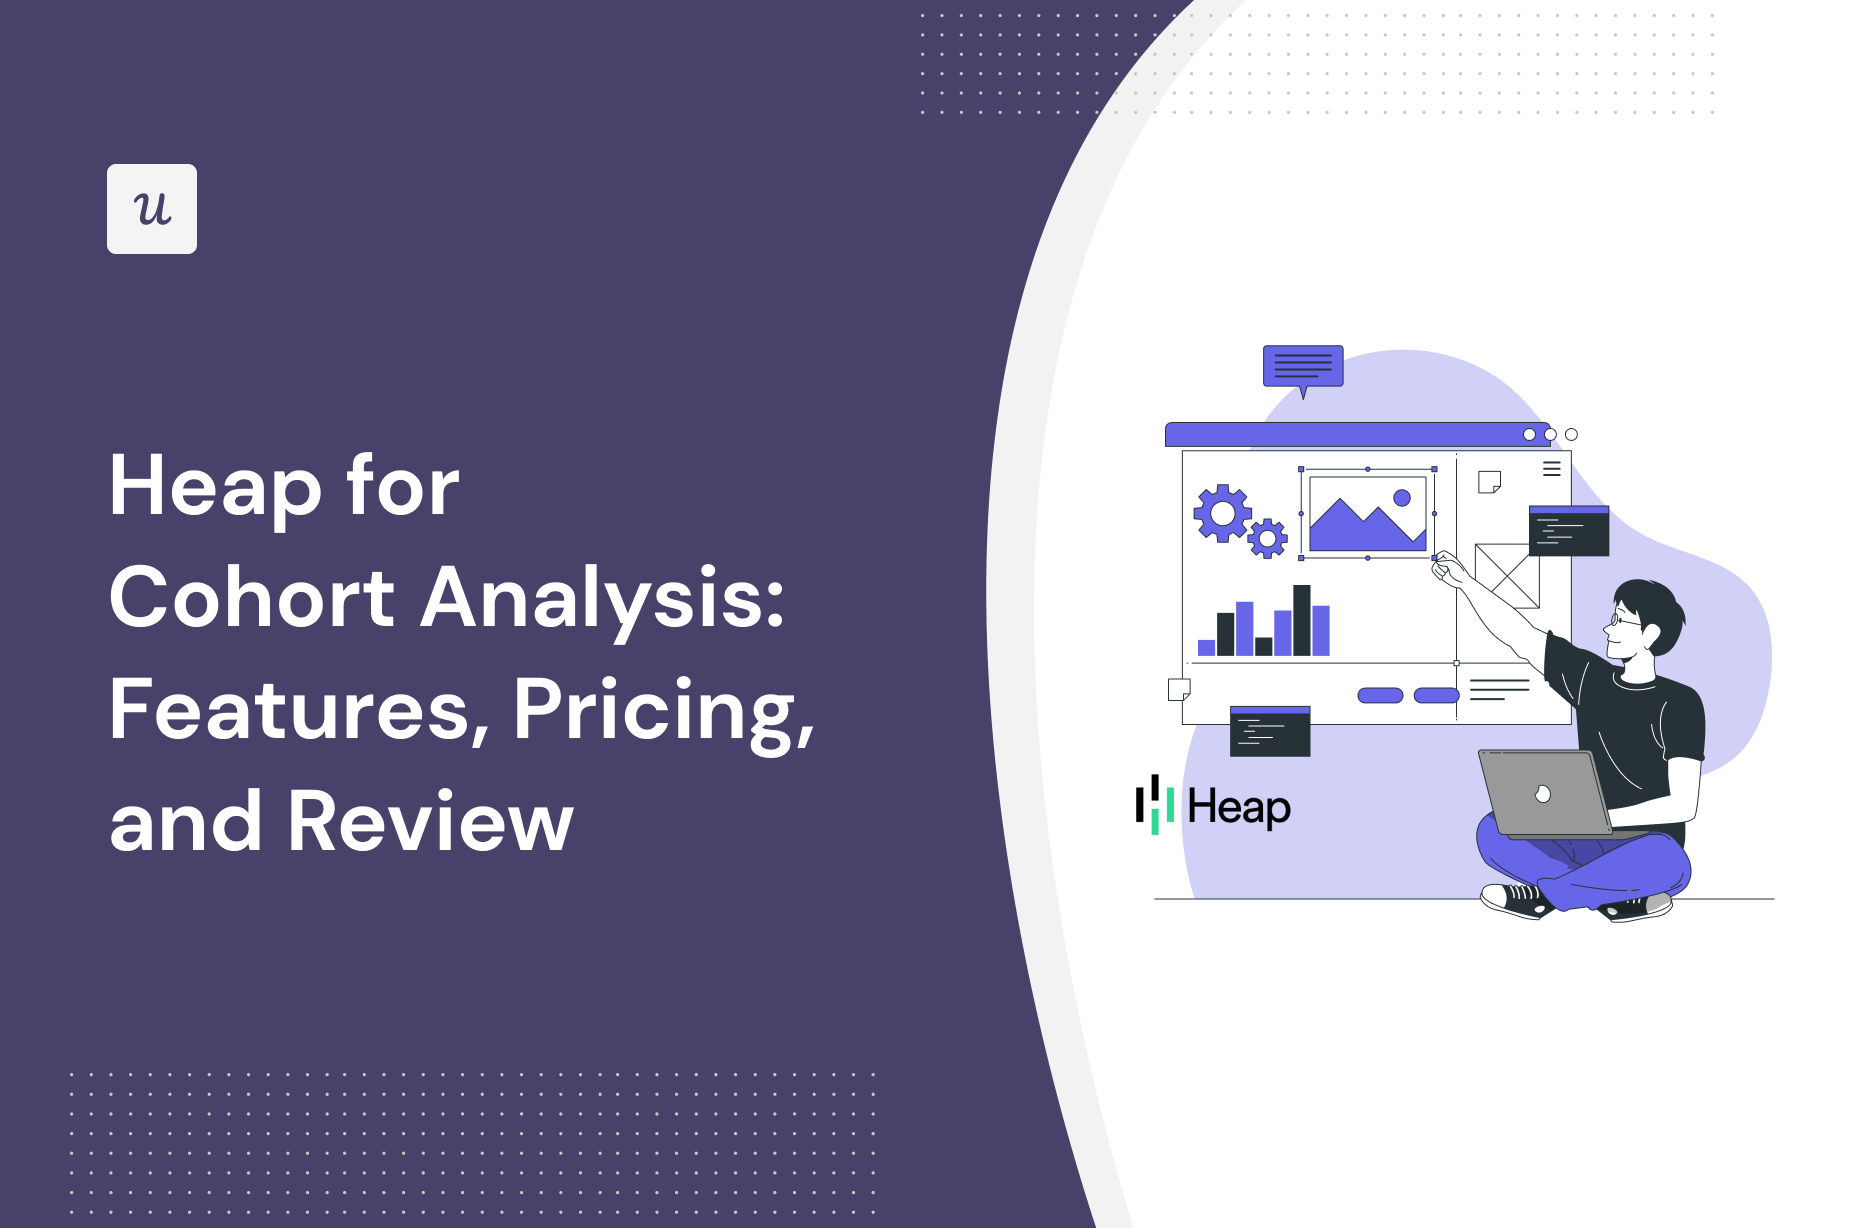 Heap for Cohort Analysis: Features, Pricing, and Review